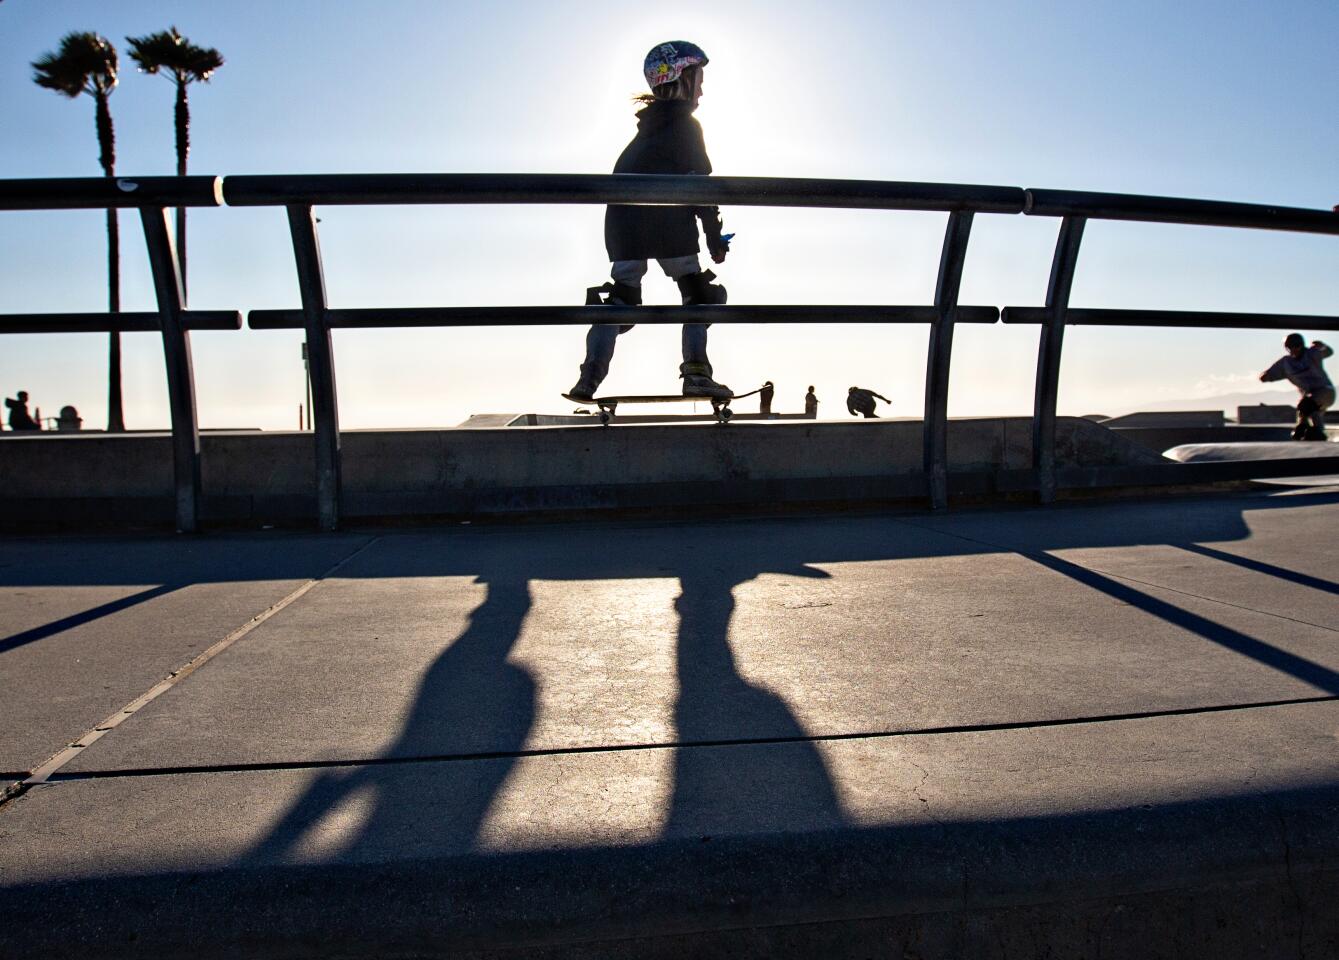 A young skateboarder soaks in the sun while skateboarding at Venice Skate Park on Wednesday in Venice.